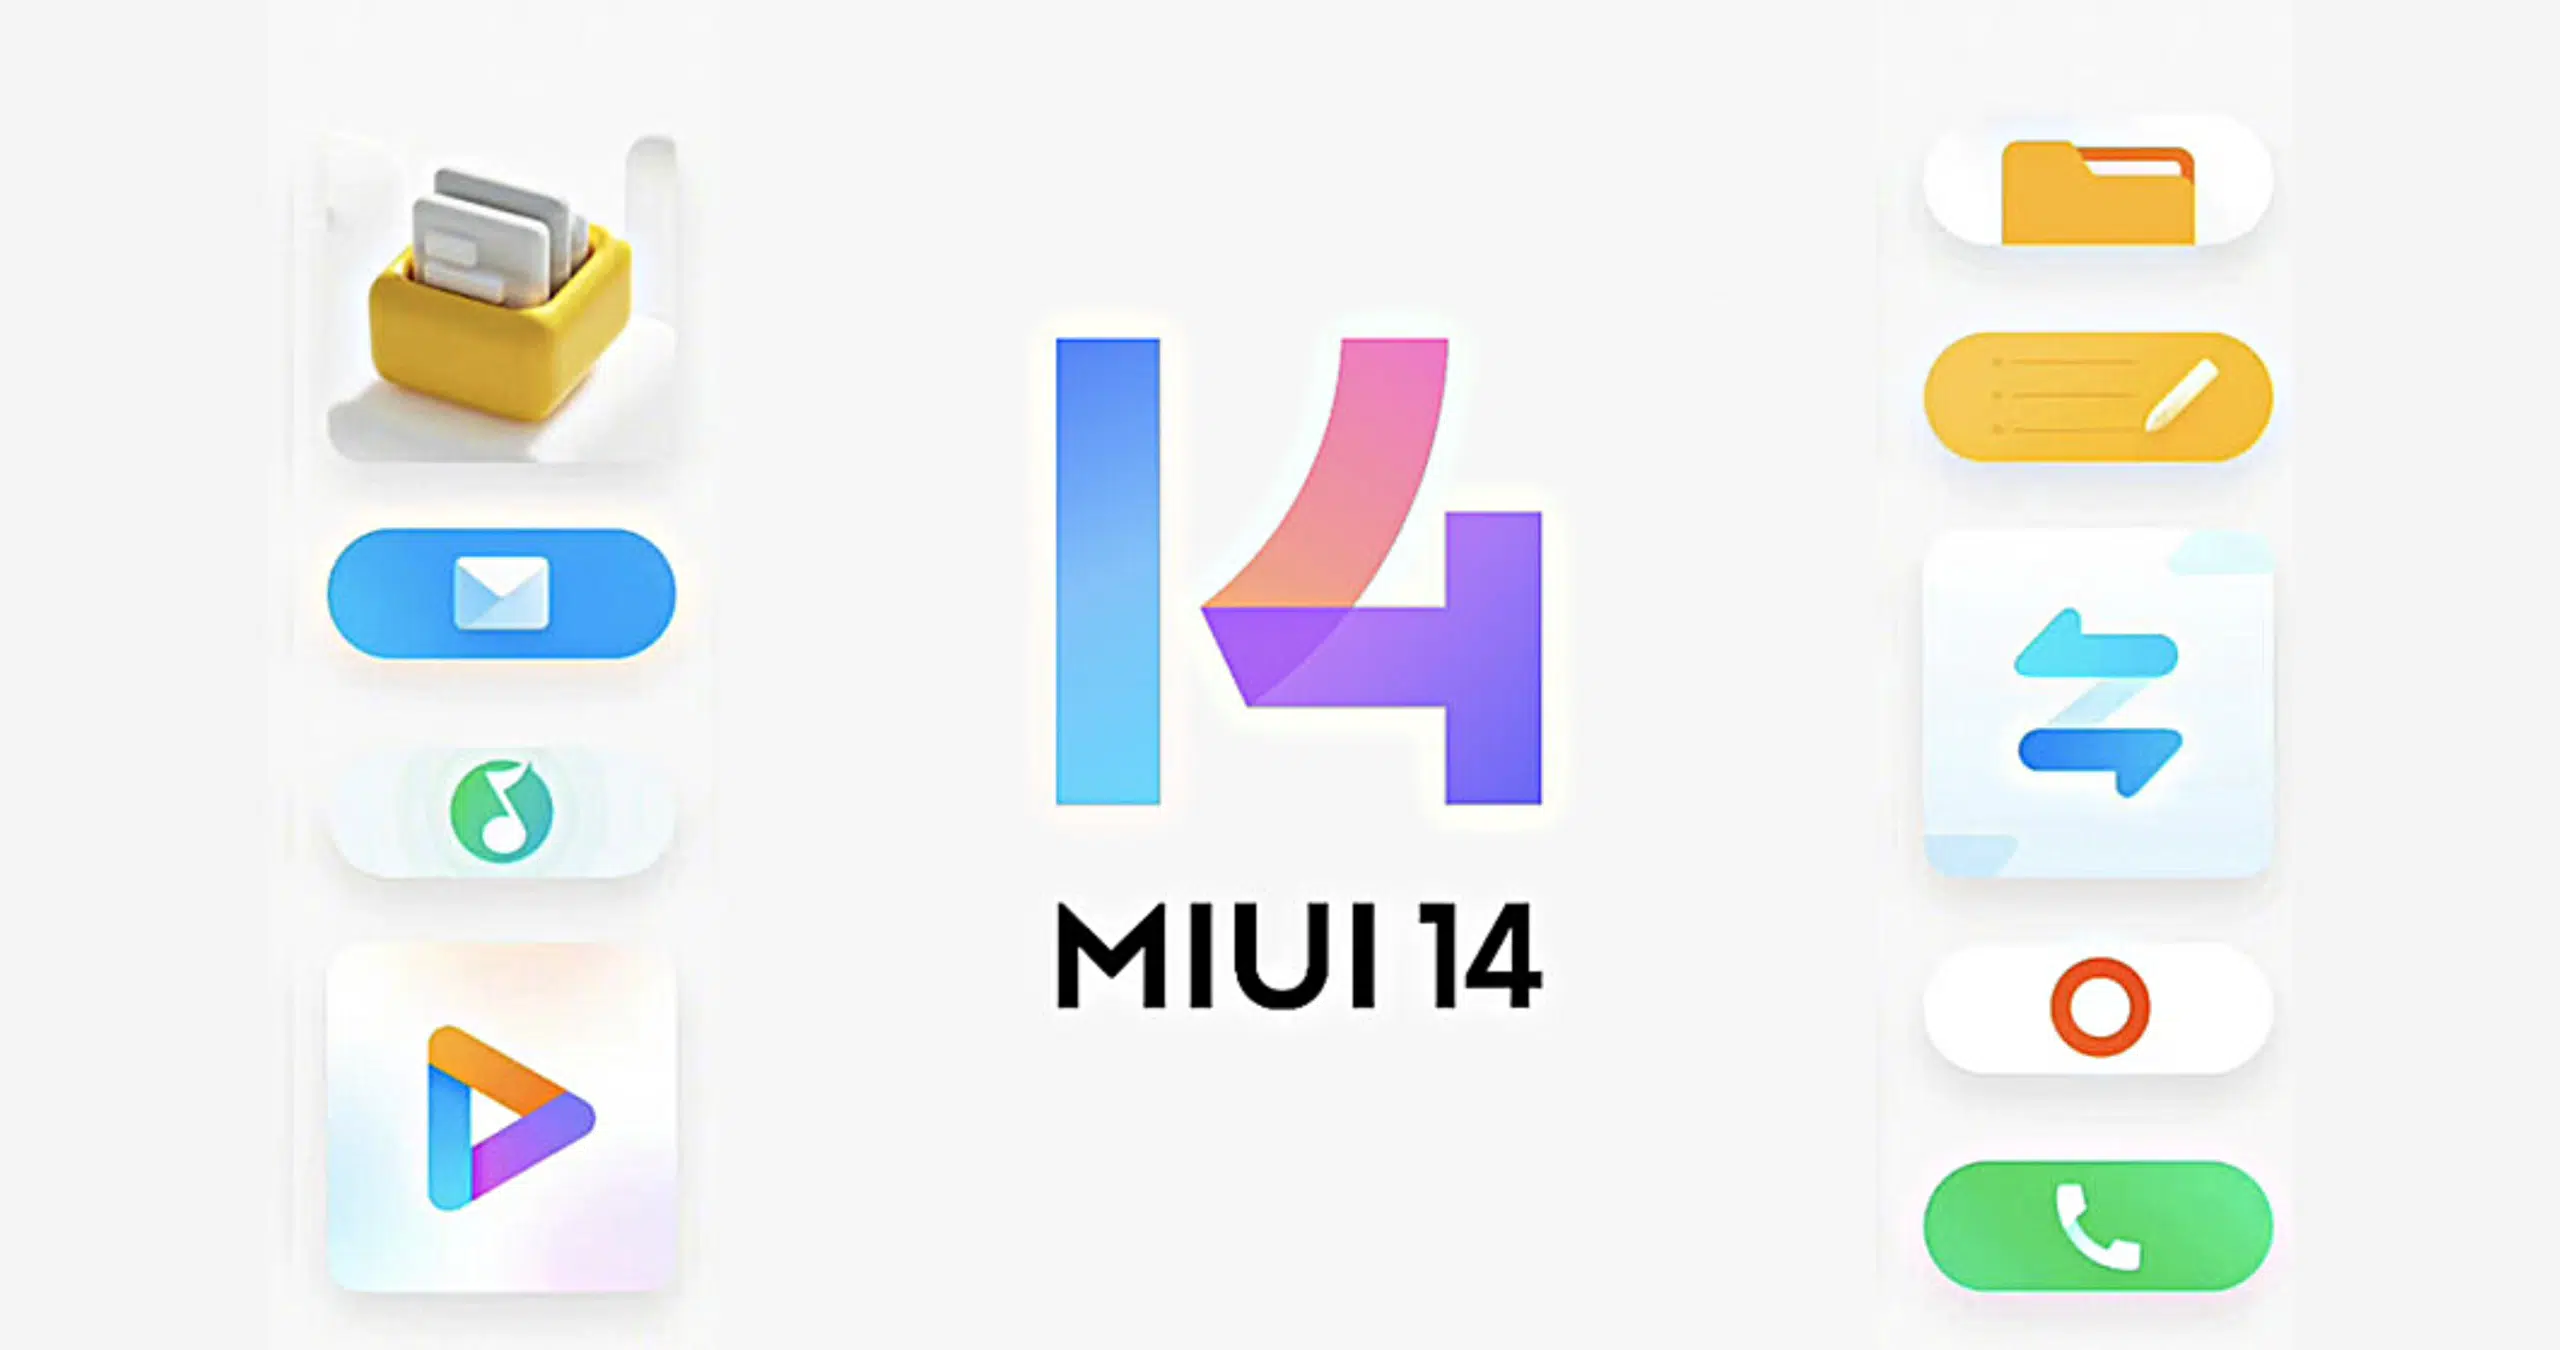 MIUI 14 Official launch date is confirmed